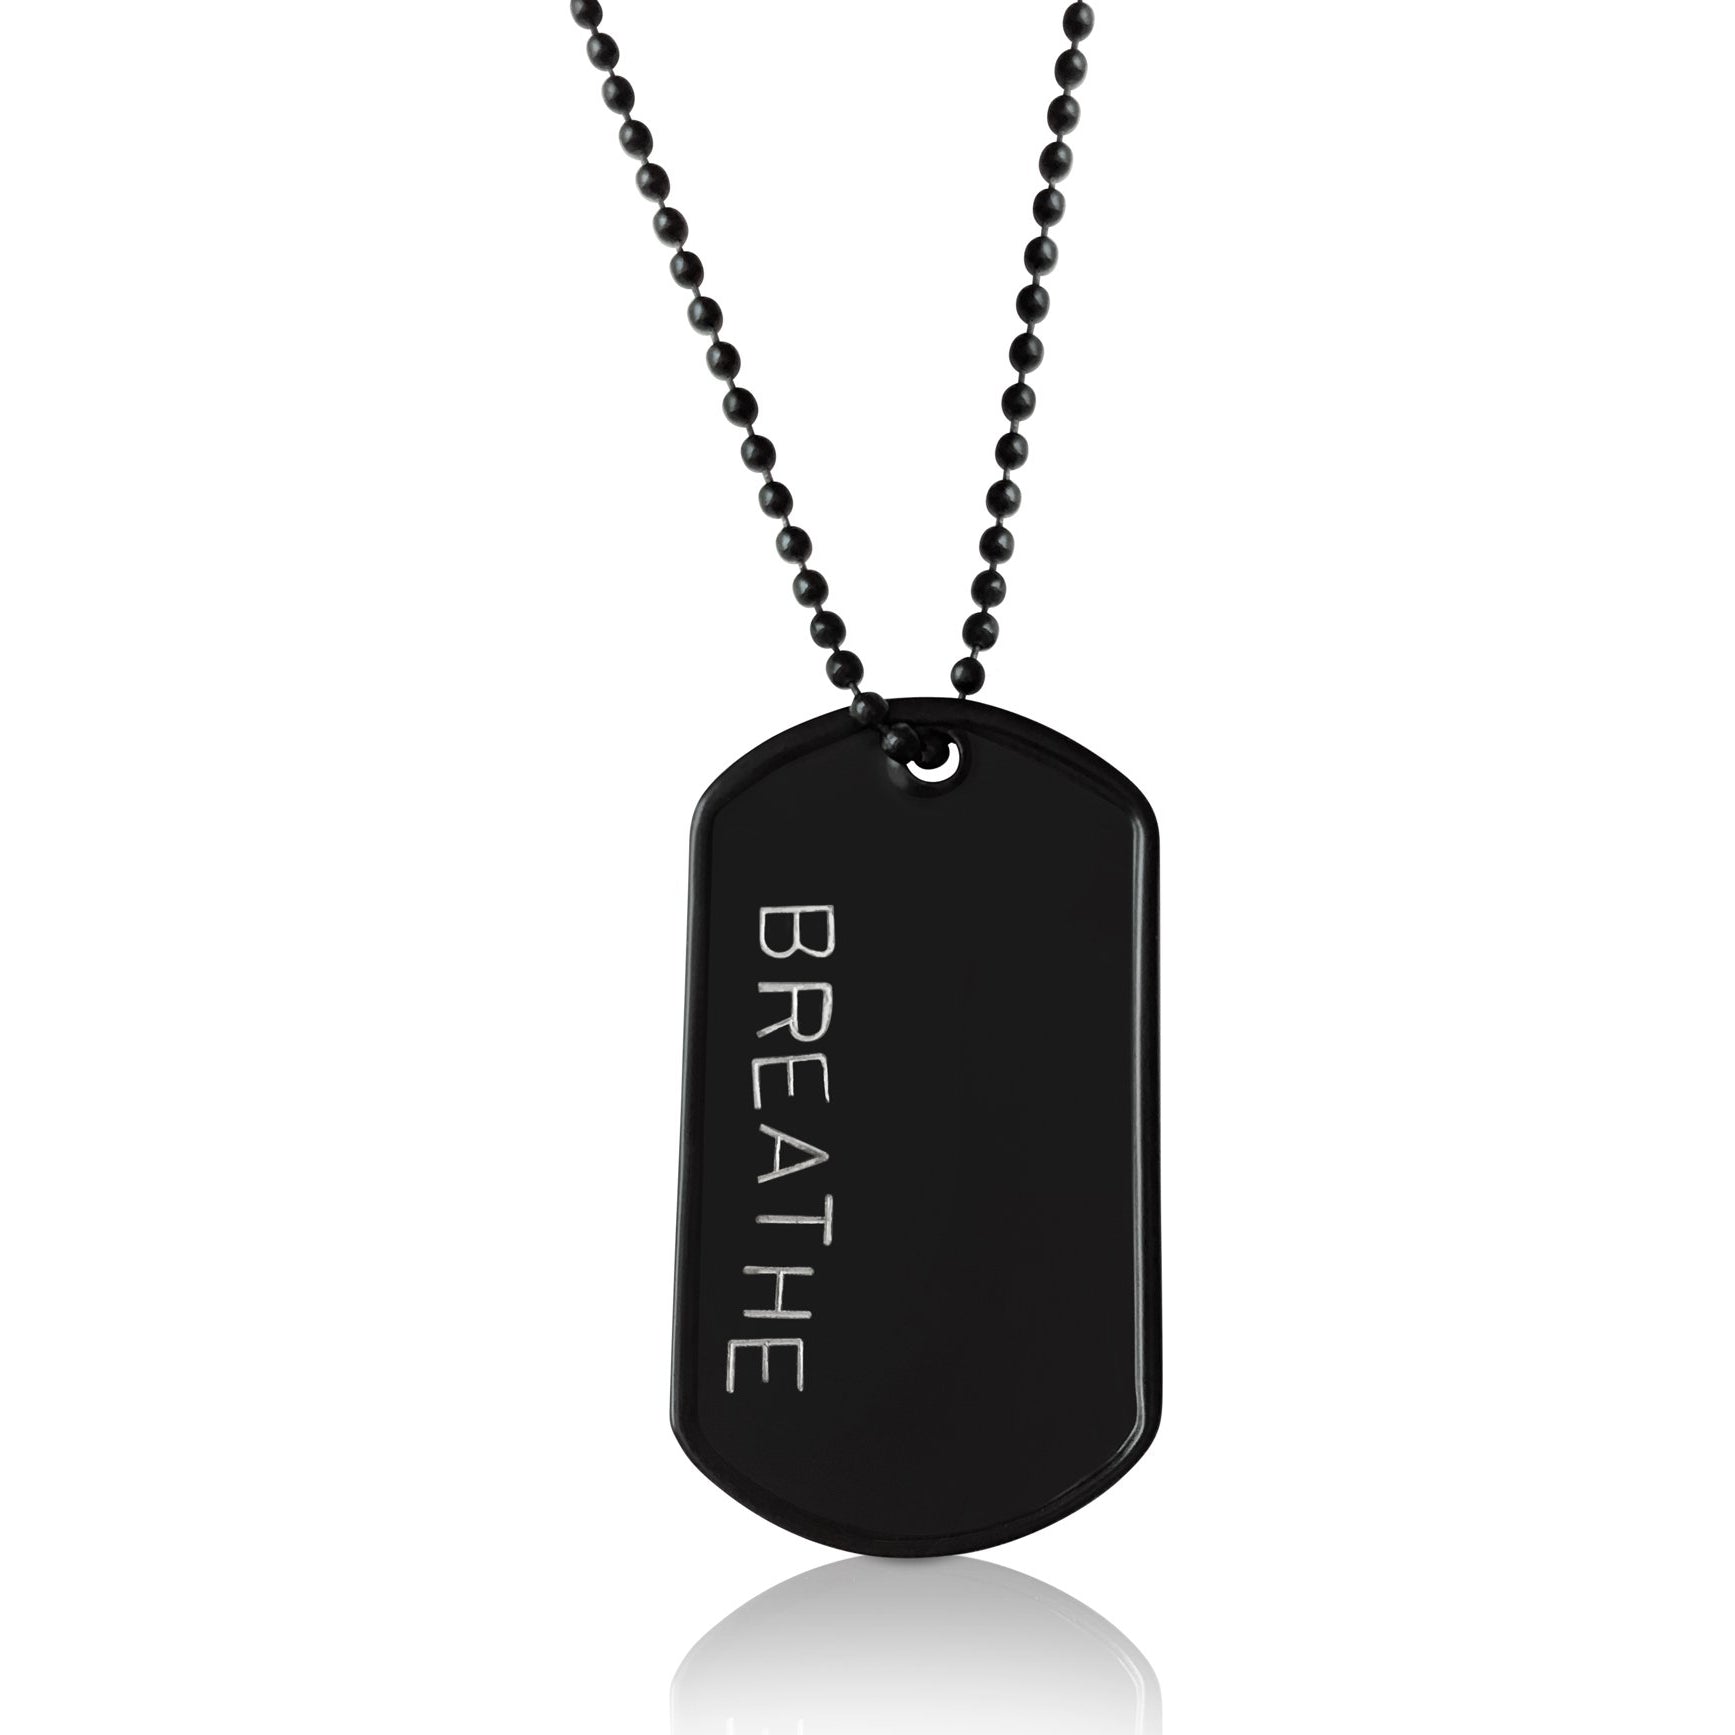 BREATHE - Black Stainless Steel Dog Tag Necklace. Yoga Inspired Military, Army, Navy Style Unisex Mindfulness Accessory